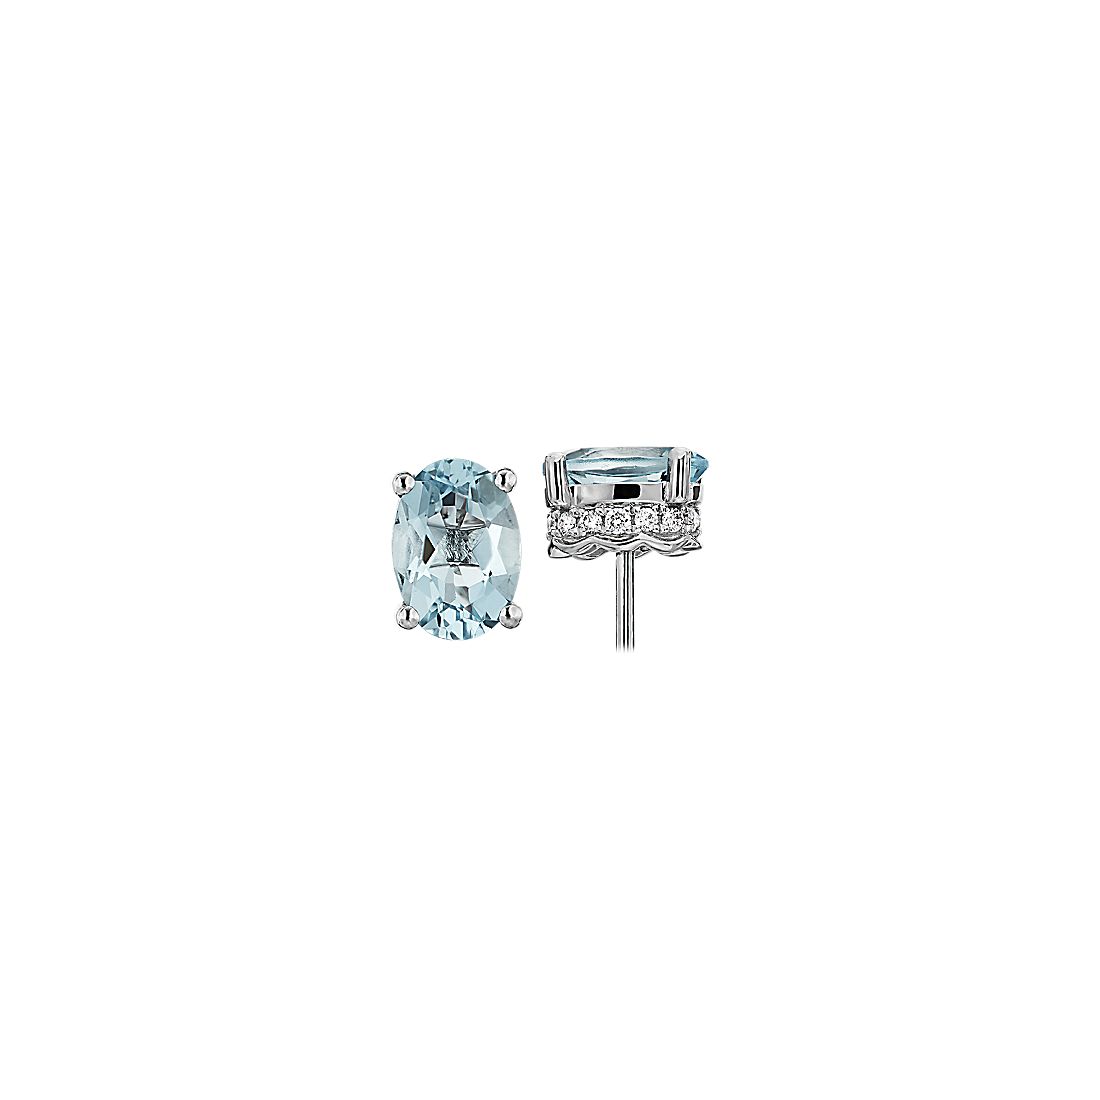 Oval Aquamarine and Diamond Earrings in 14k White Gold (7x5mm)